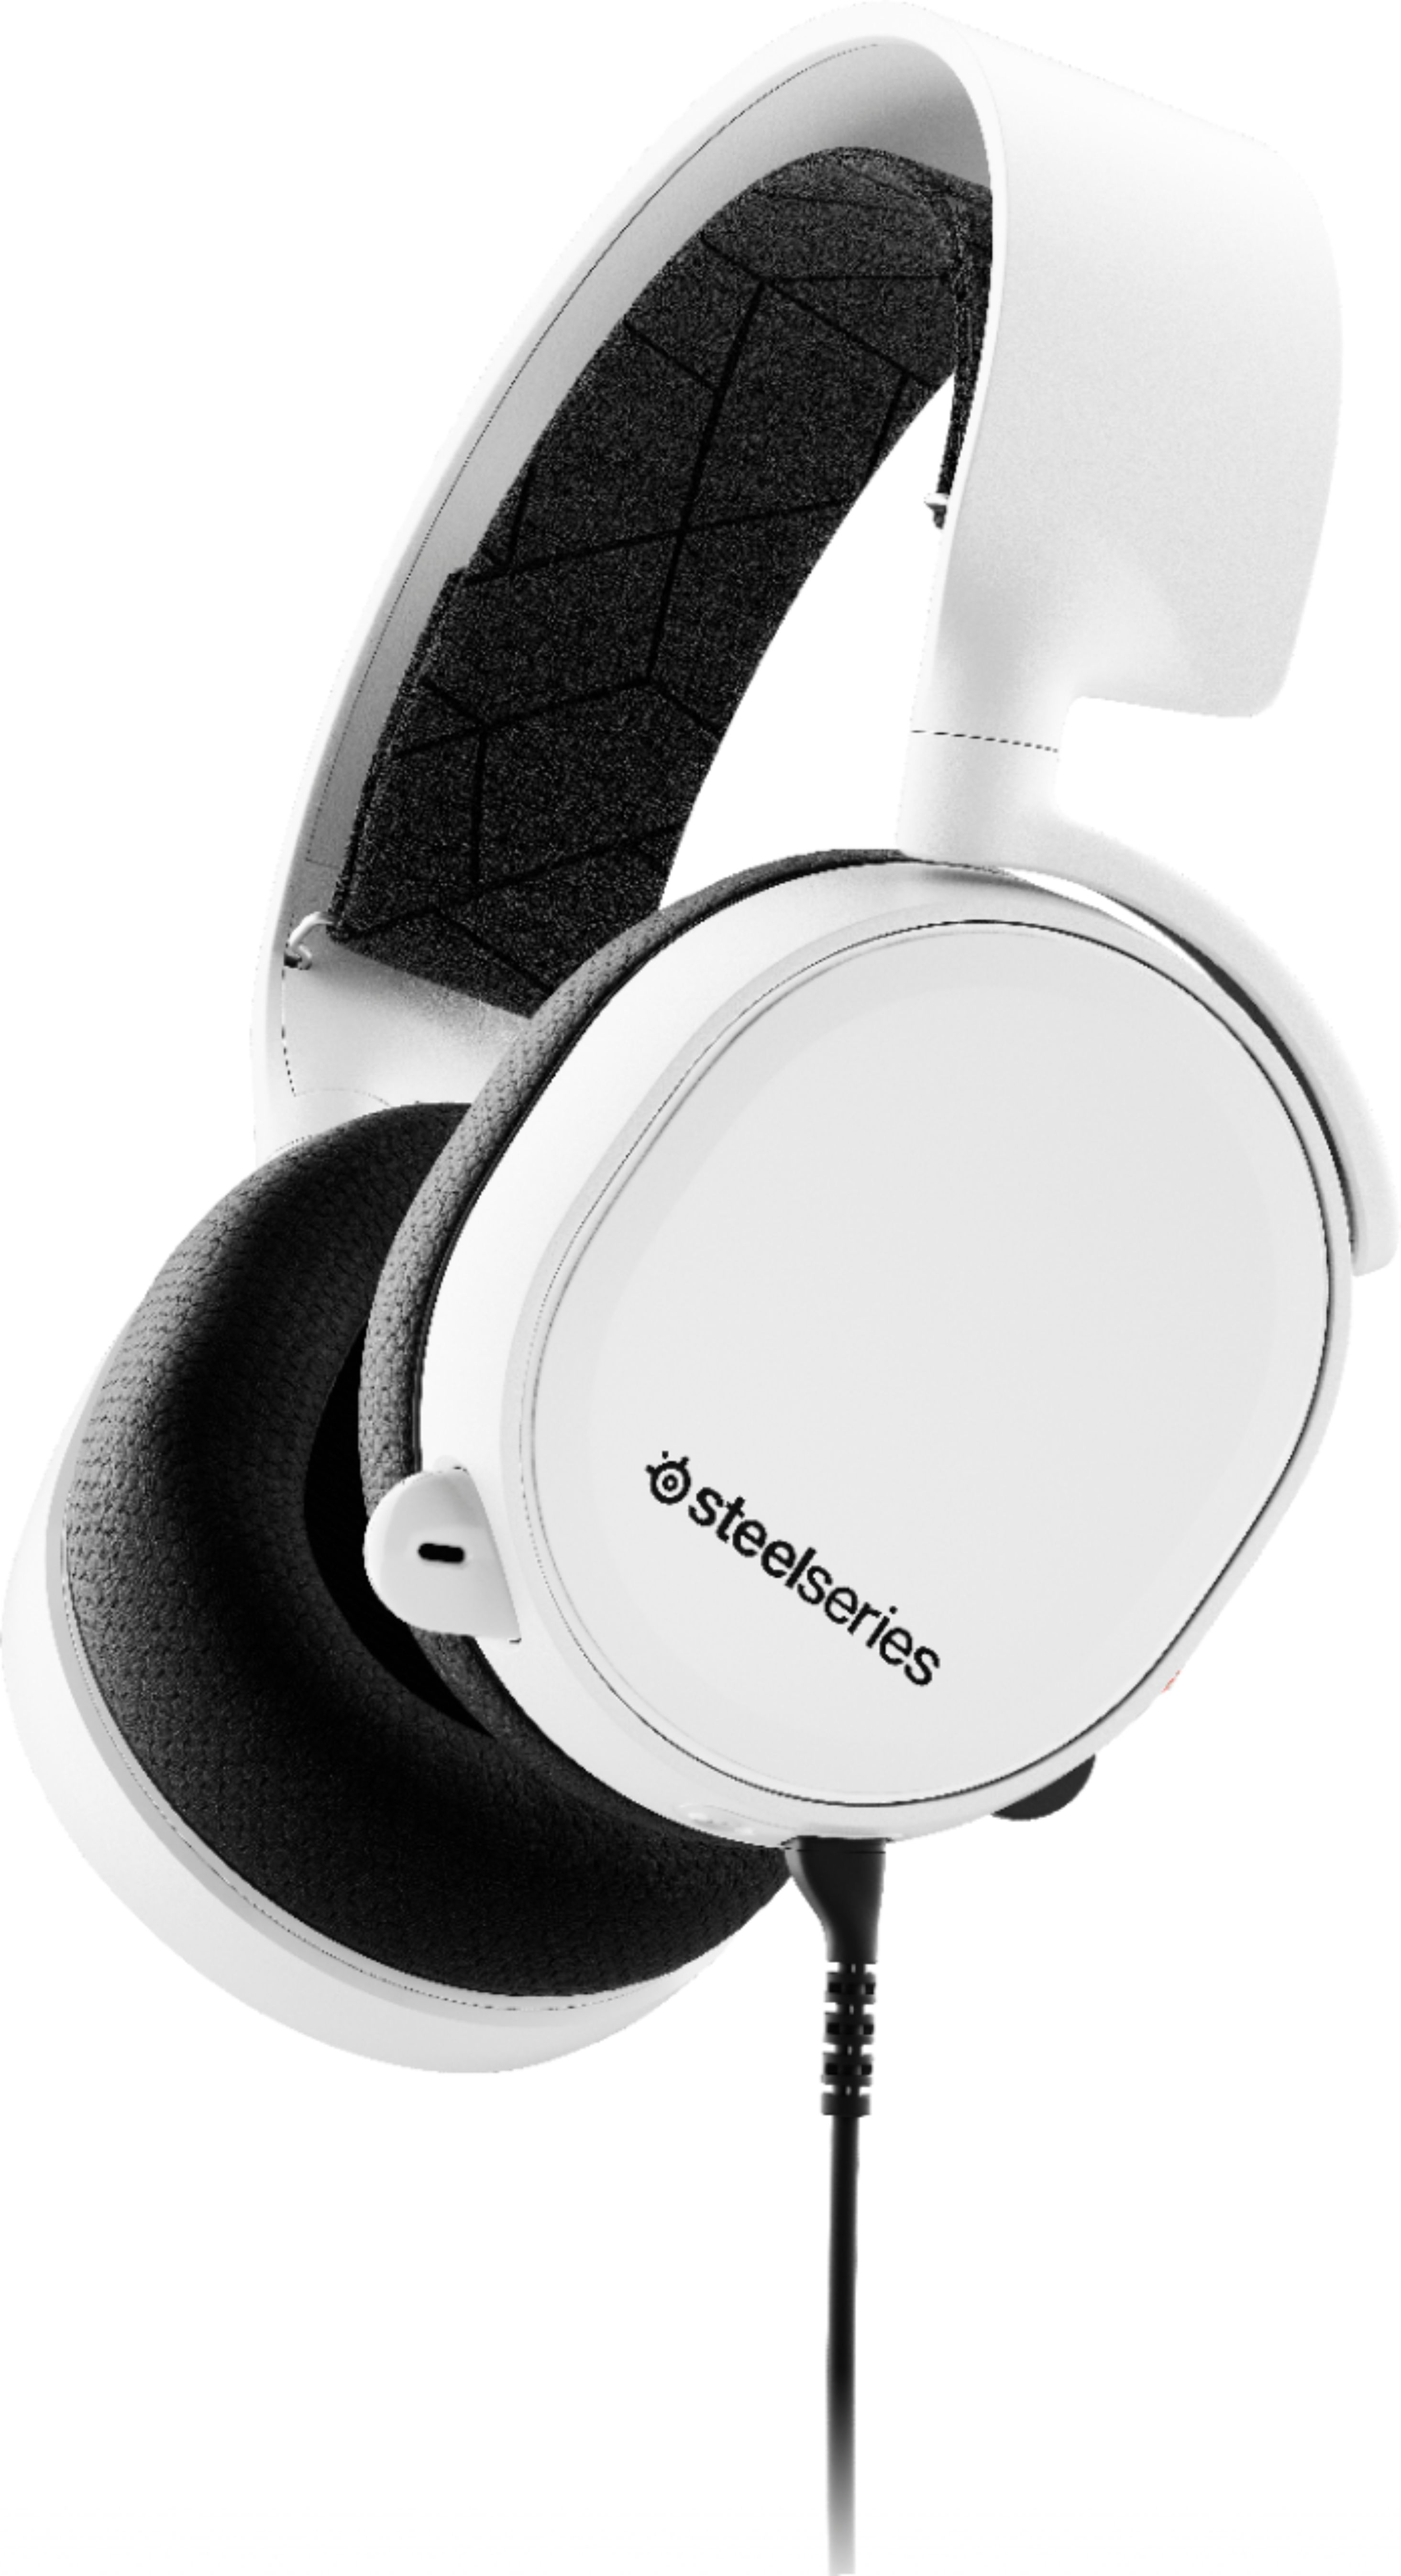 SteelSeries - Arctis 3 Wired Stereo Gaming Headset for PC, PlayStation 4, Xbox One, Nintendo Switch, VR, Android and iOS - White